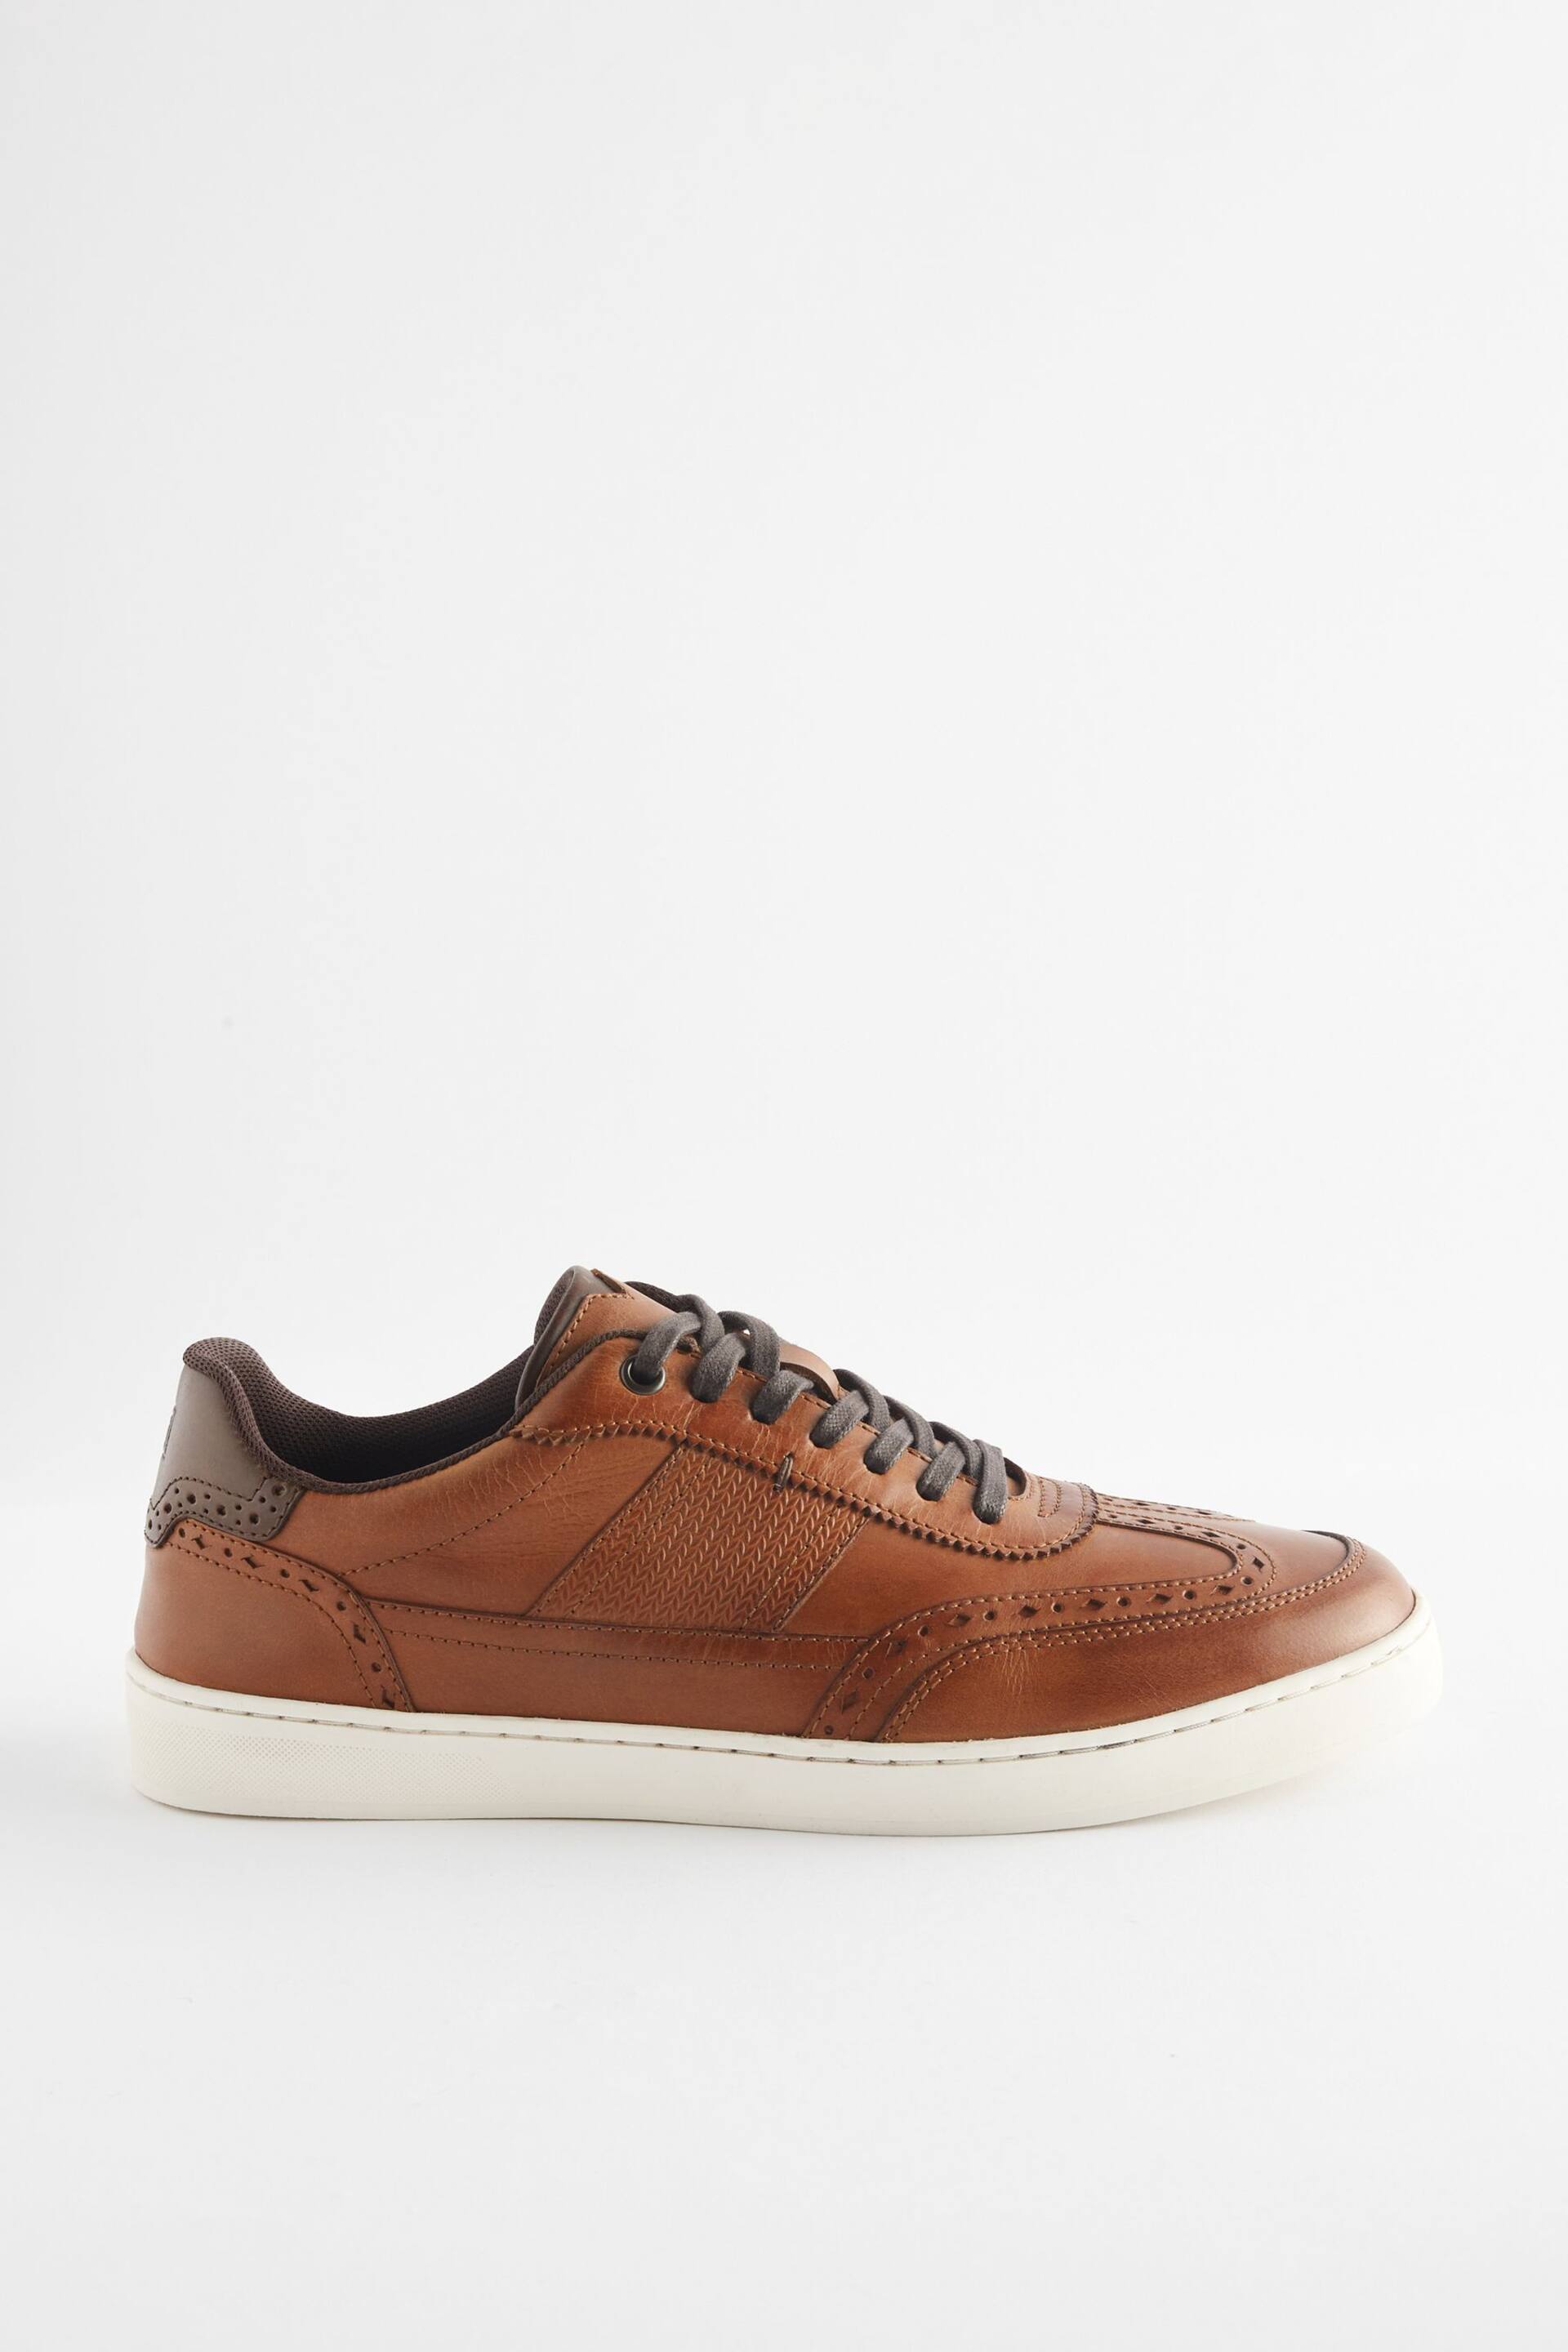 Tan Brown Leather Brogue Trainers - Image 2 of 5